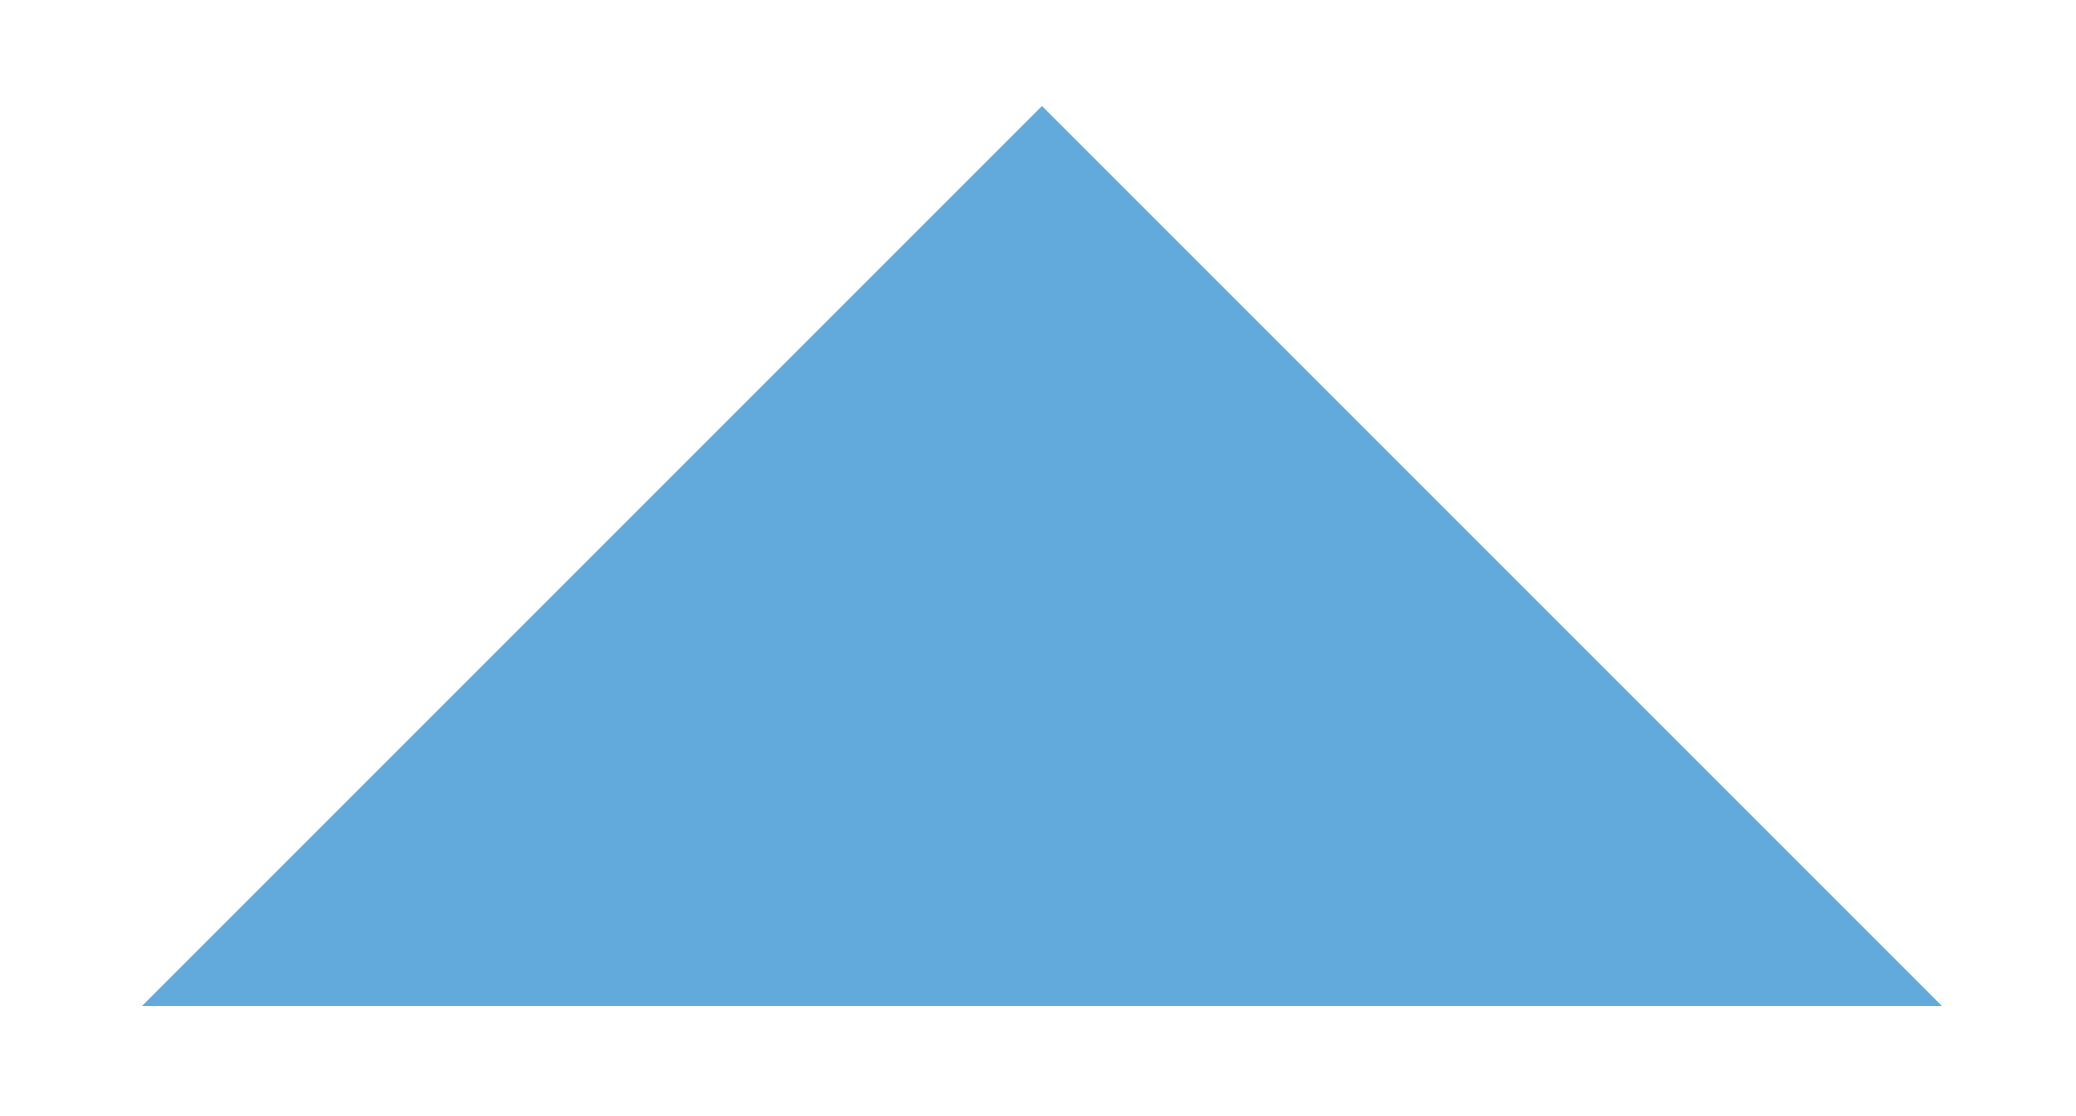 Example of Drawing Triangles with CSS